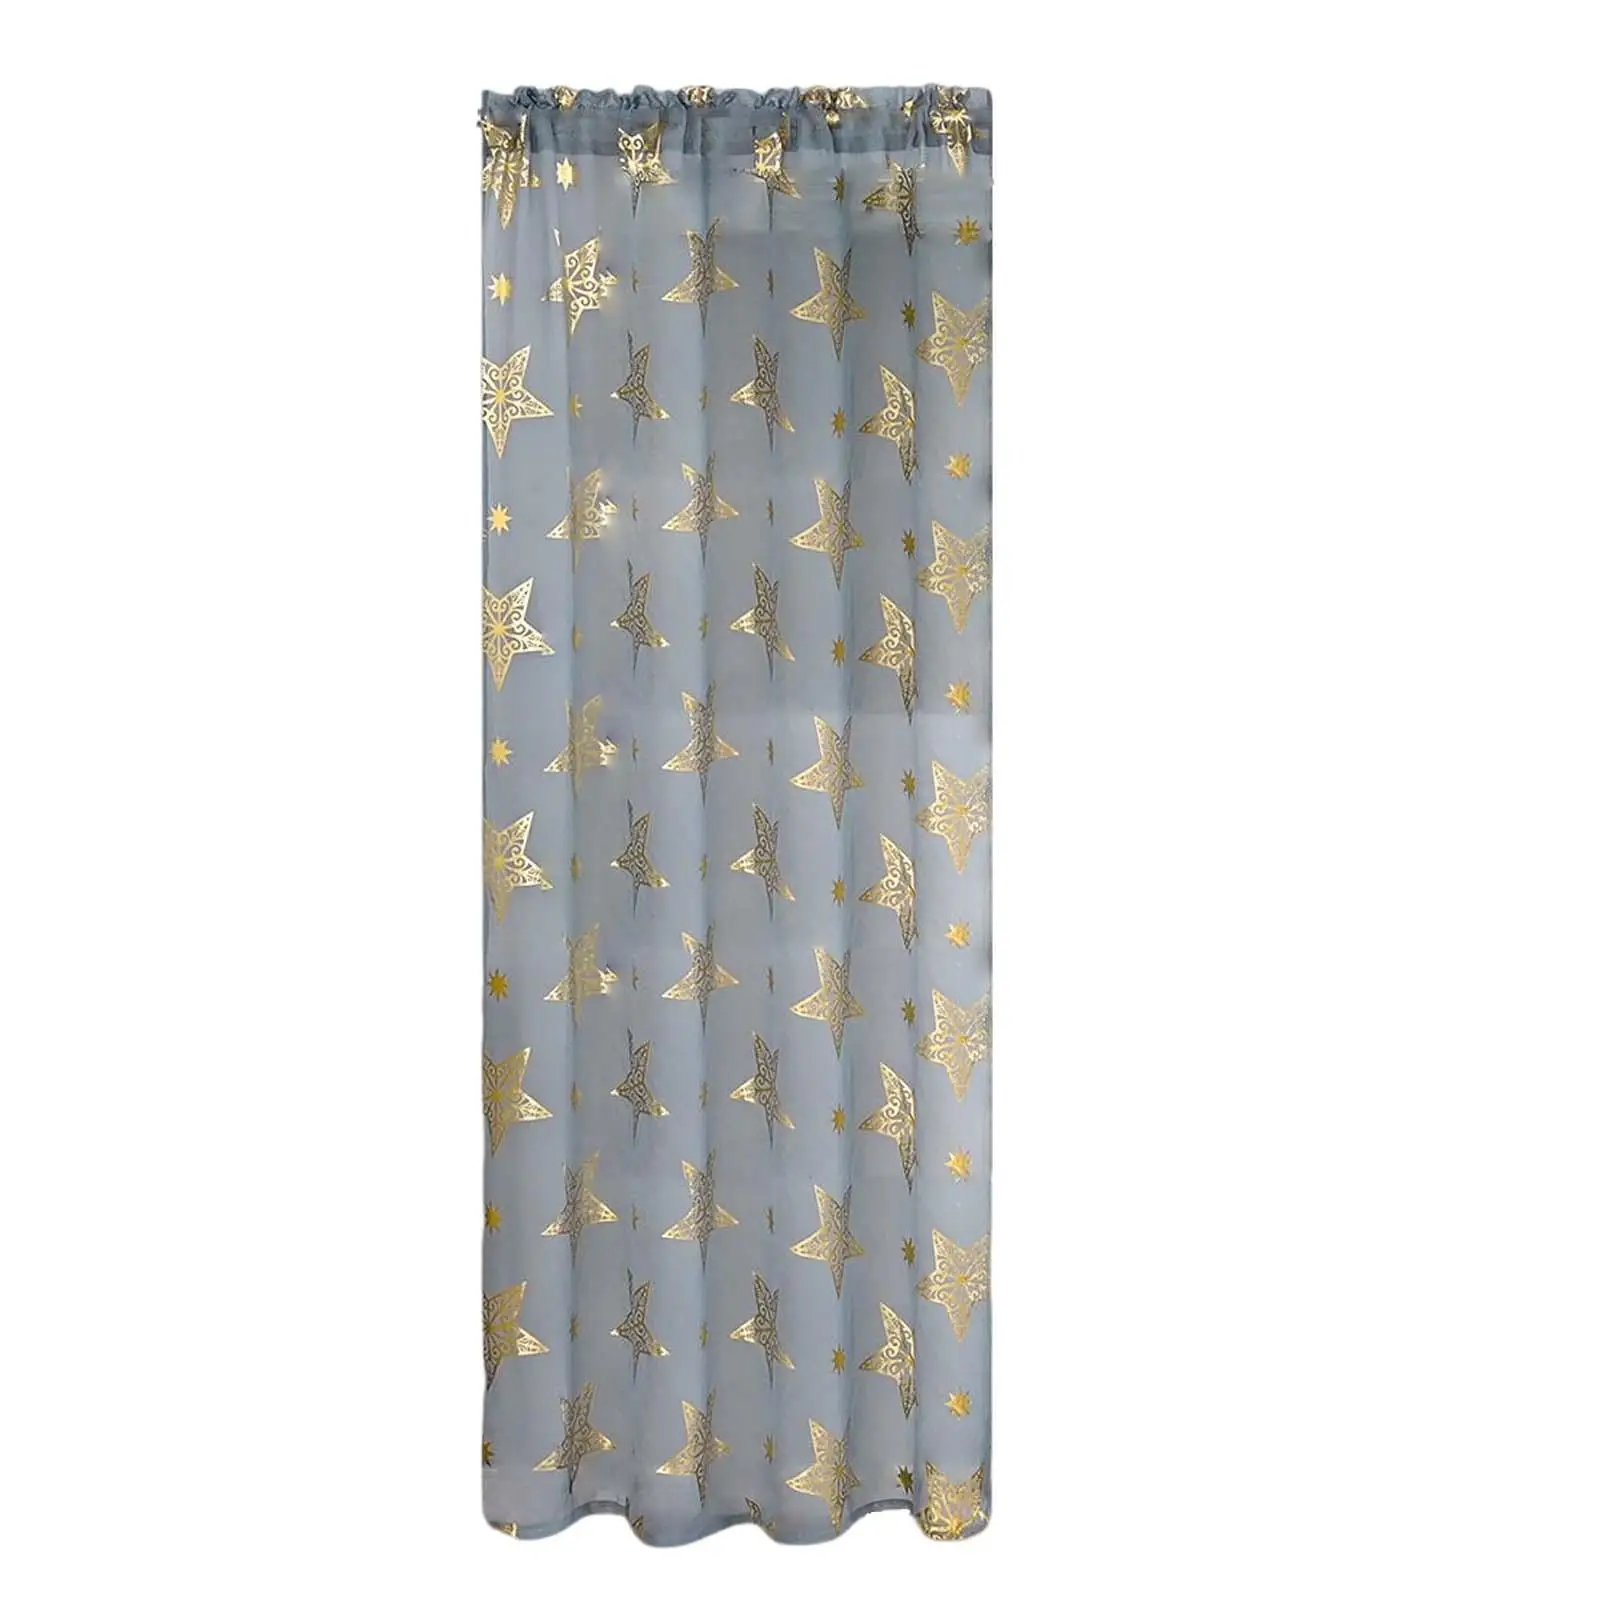 Voile Curtains Translucent Privacy Voile Drapes Star Printed for Living Room